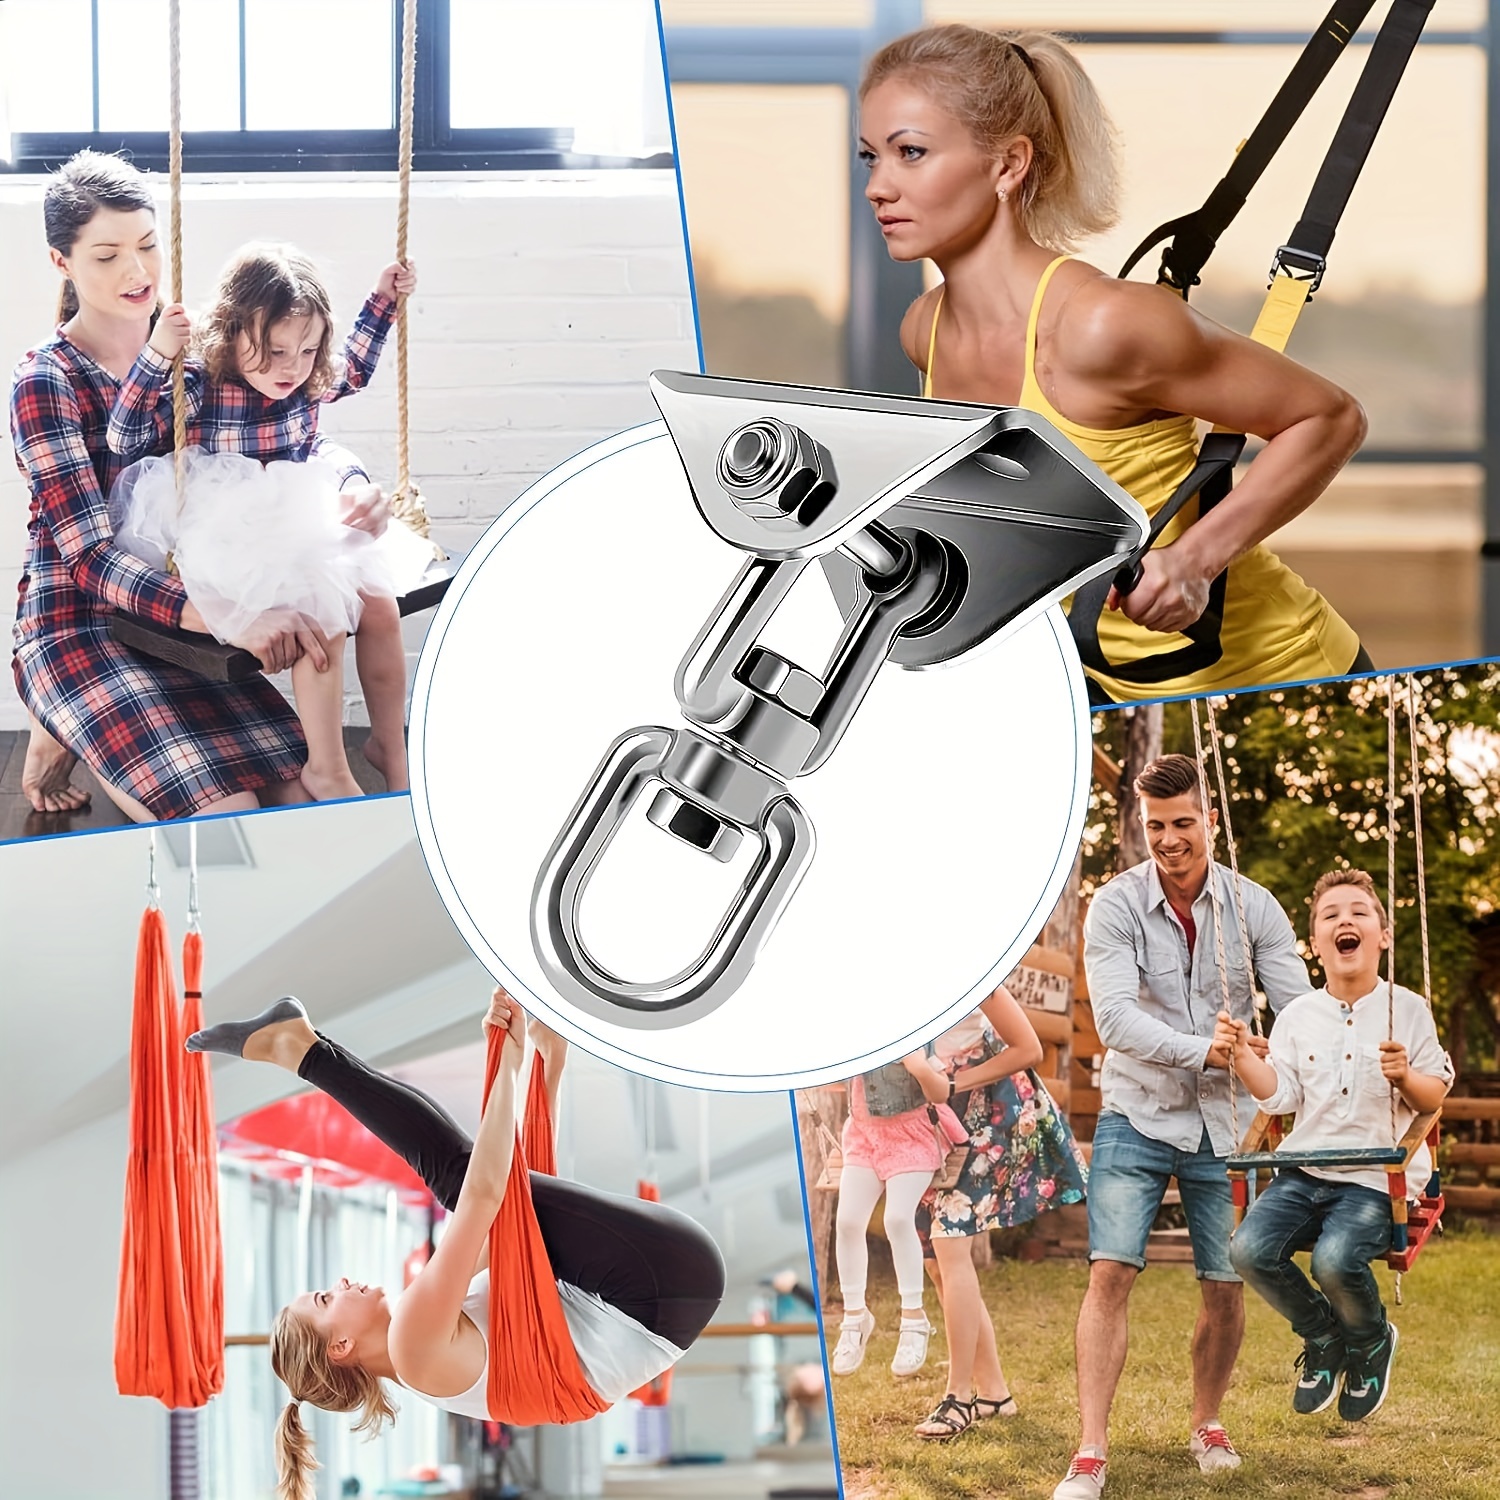 Heavy Duty 360° Swivel Swing Hanger, Stainless Steel Swing Hook for Ceiling  Wooden Porch Swing Hanging kit Playground Gym Rope Boxing Bag Hammock